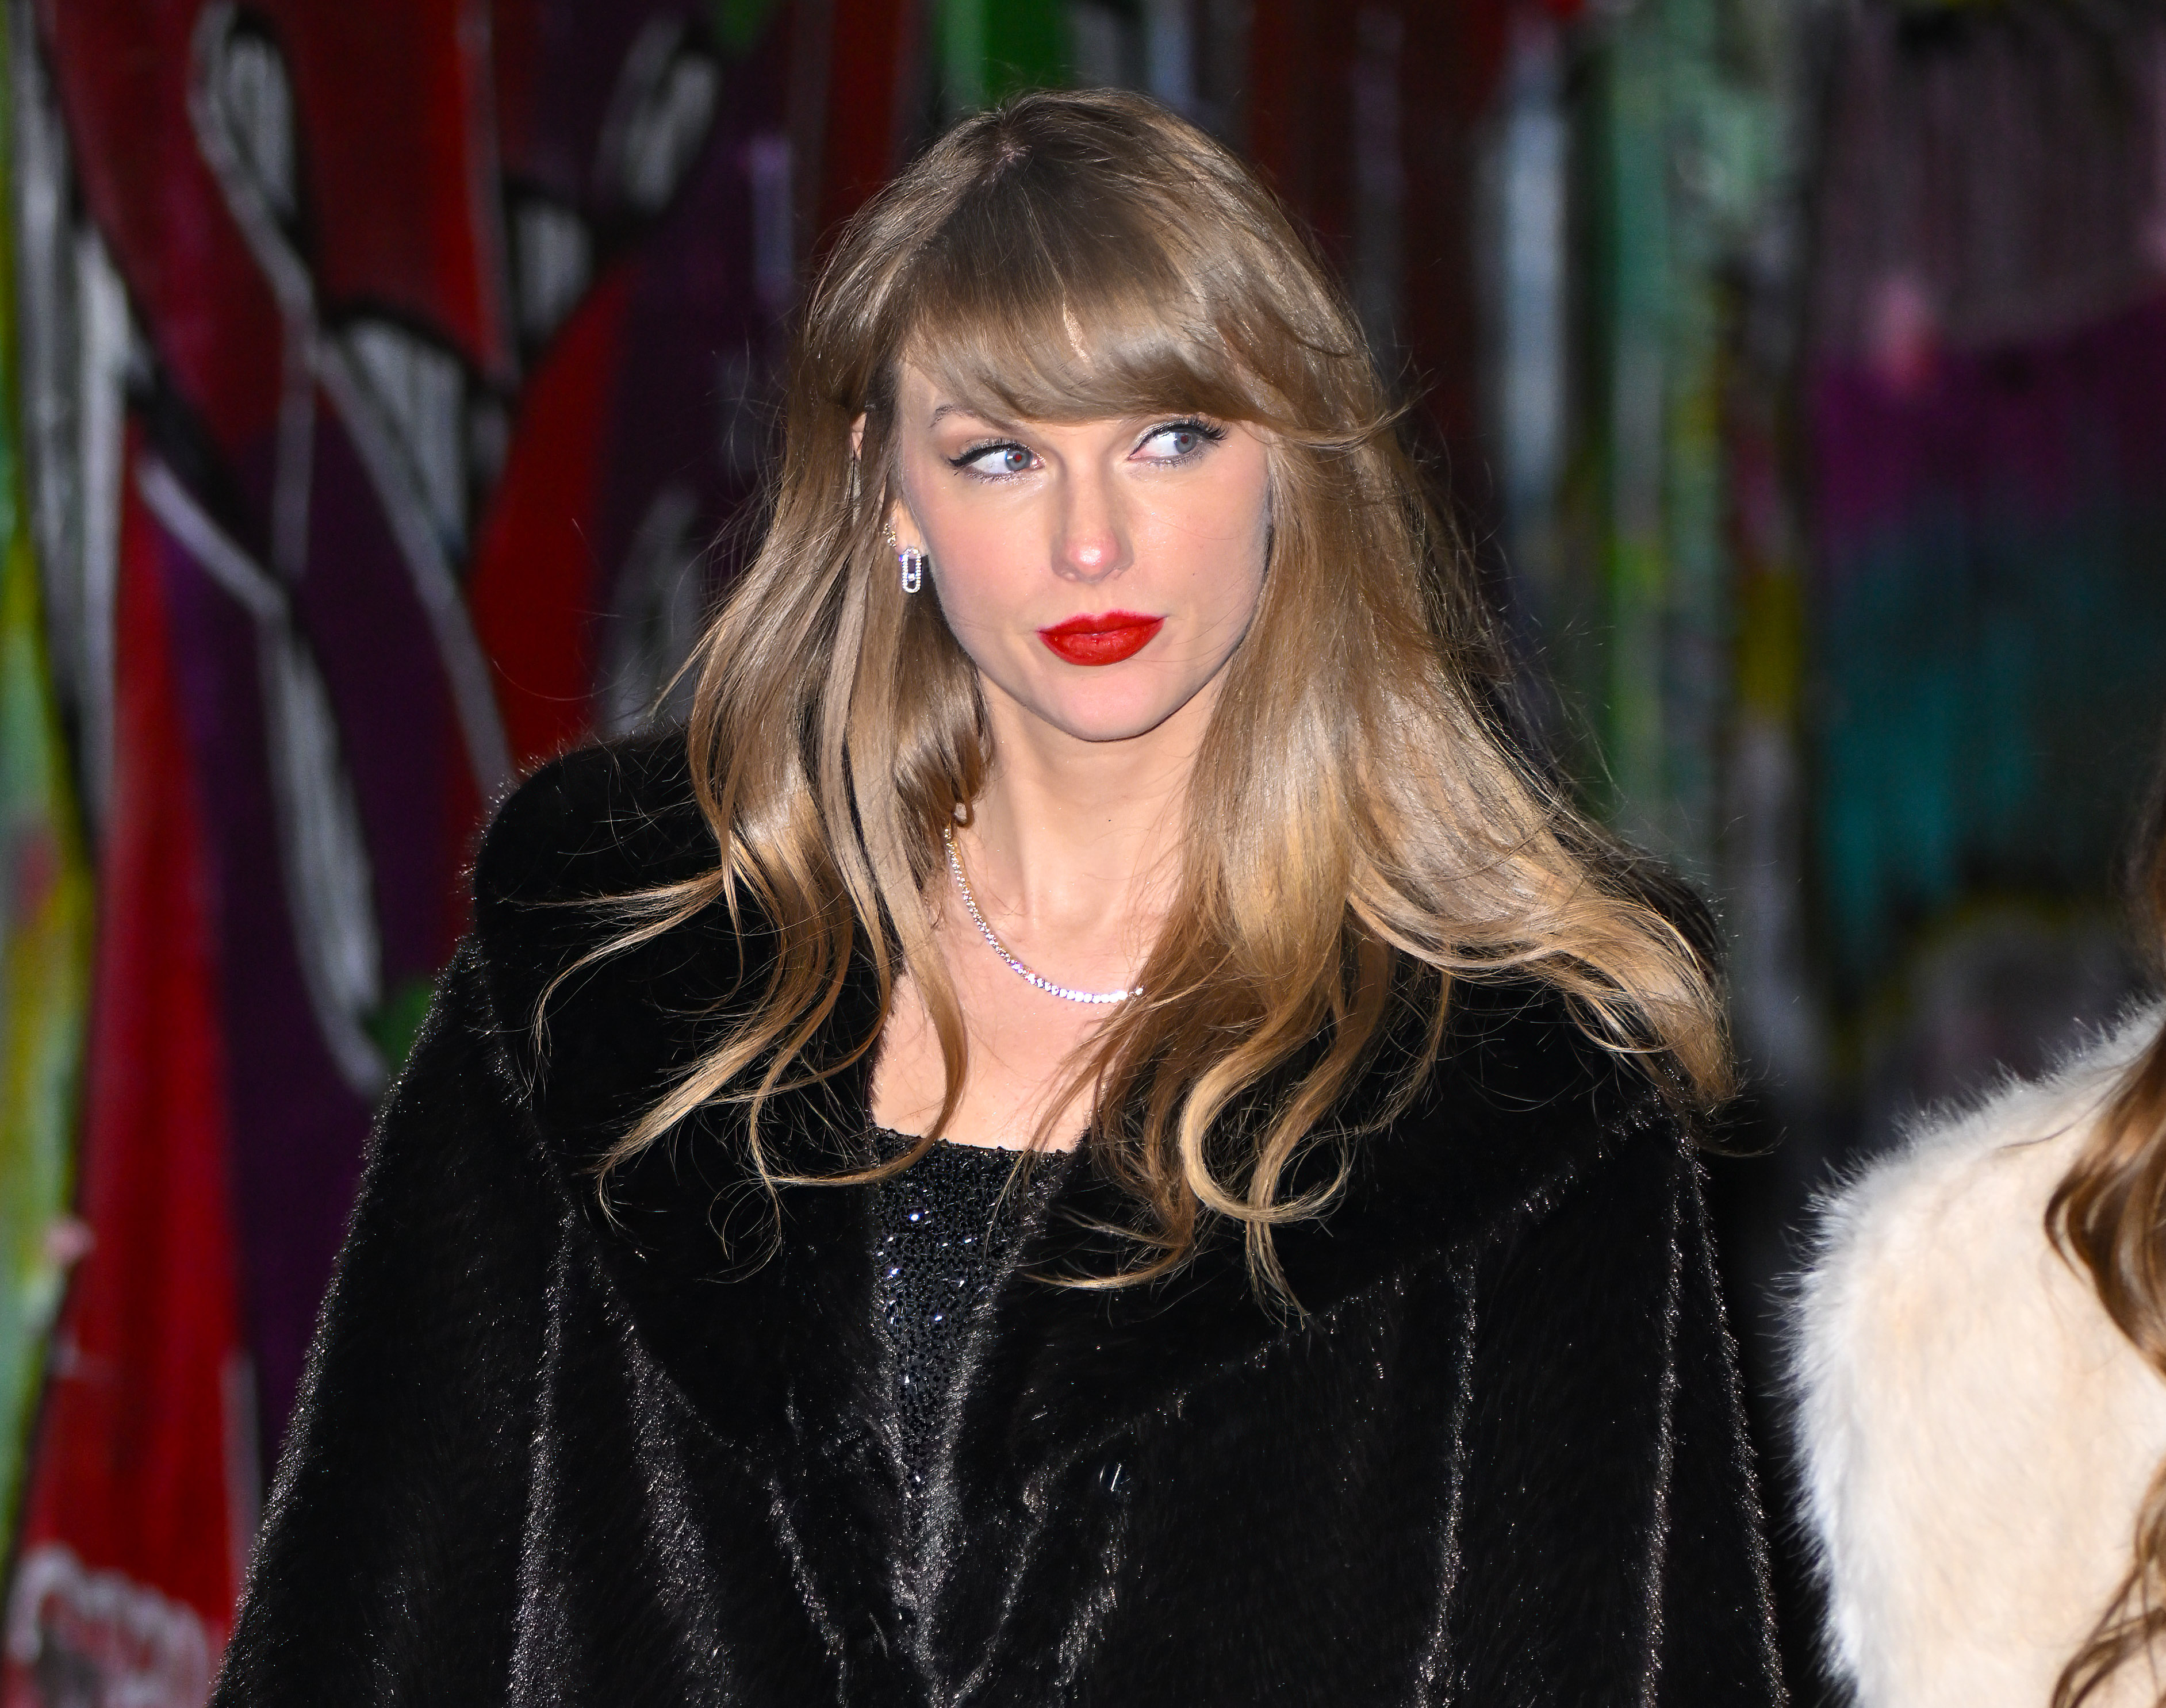 Taylor Swift Fans Furious Over Essay Questioning Her Sexuality